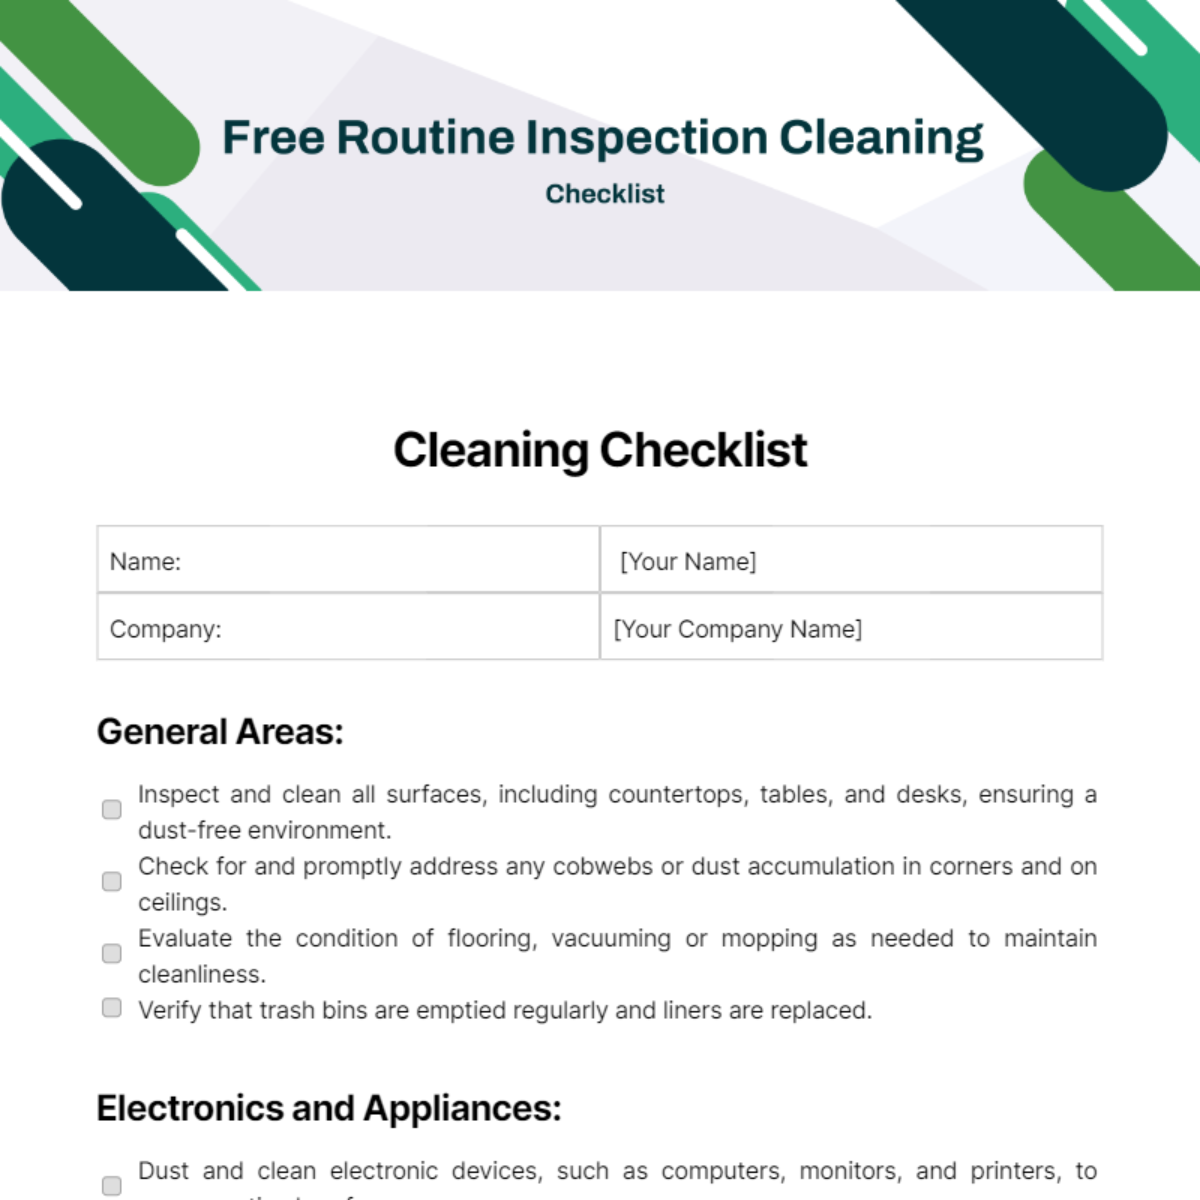 Free Routine Inspection Cleaning Checklist Template